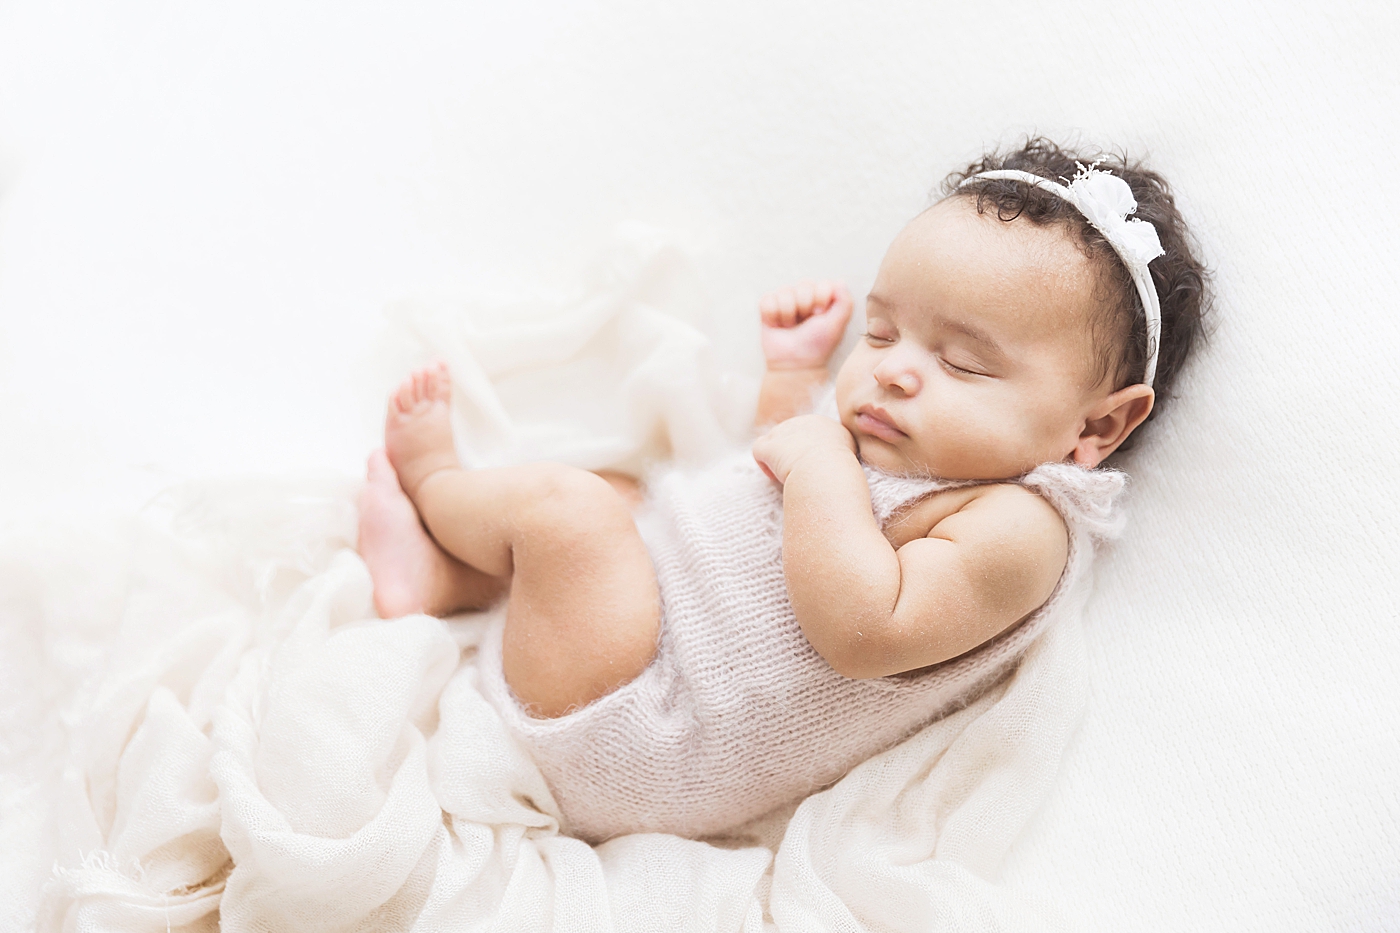 Baby girl curled up sleeping for newborn photos. Photo by Fresh Light Photography.